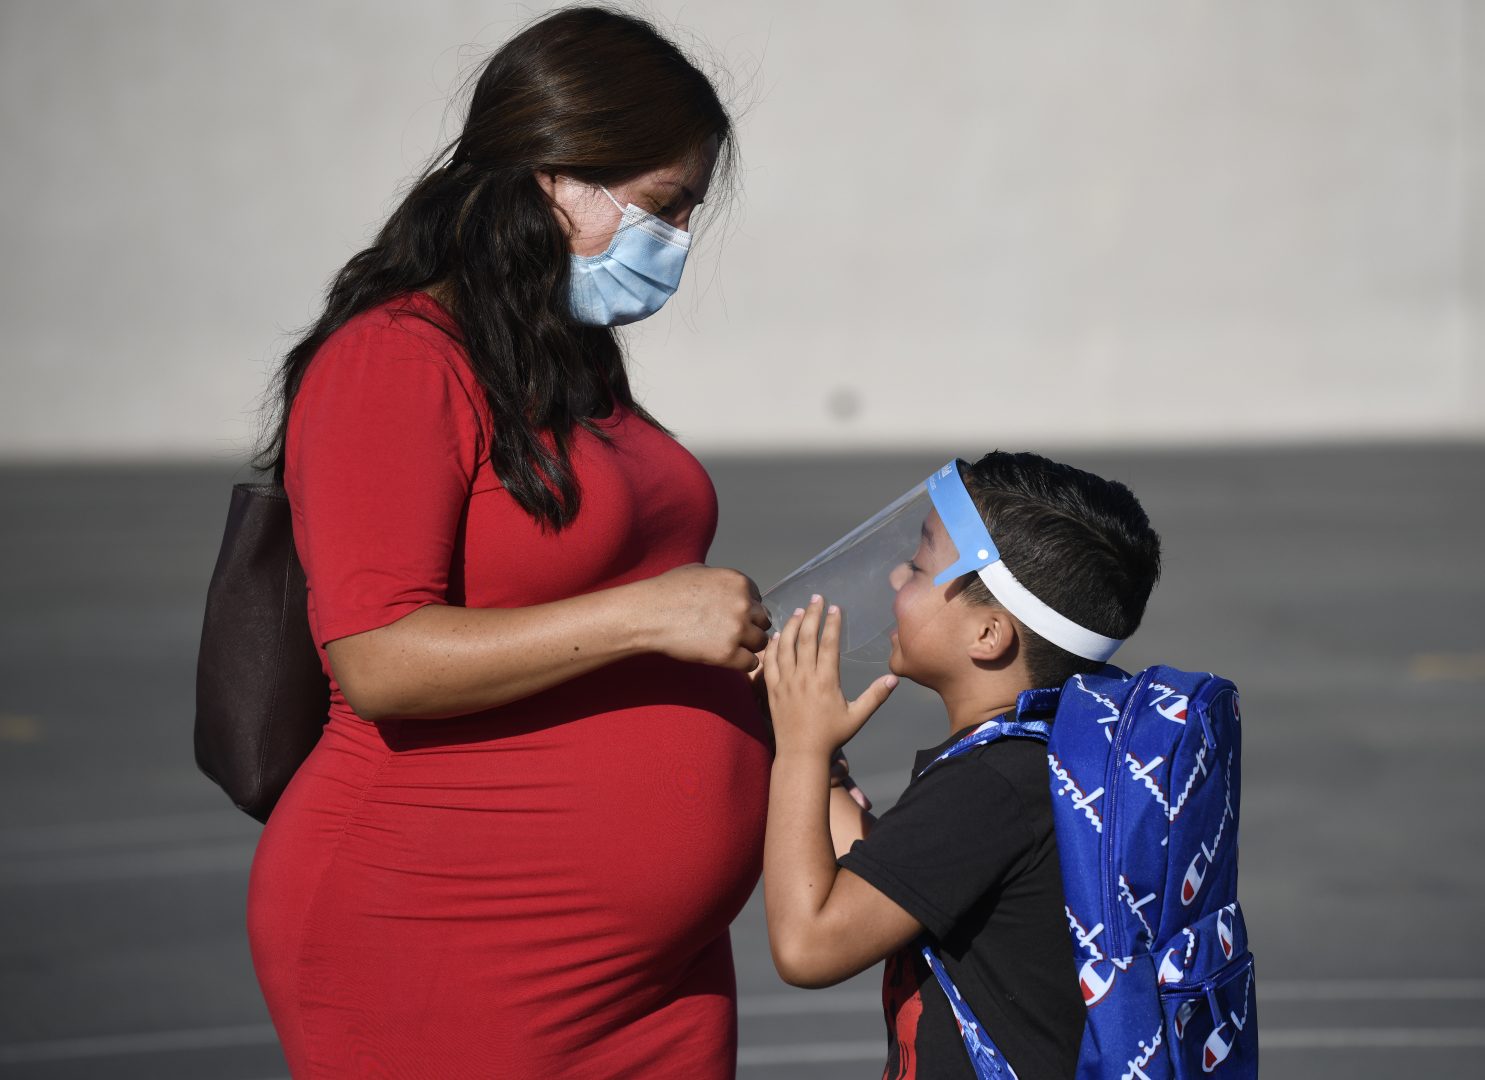 FILE - In this July 21, 2021, file photo, a parent adjusts her son's visor on the first day of school at Enrique S. Camarena Elementary School in Chula Vista, Calif. Parents in California on Friday, Oc.t 1, 2021, had mixed reactions to Gov. Gavin Newsom's plan to mandate coronavirus vaccinations for schoolchildren once they're fully approved by the FDA. Some welcomed the move as a way to keep children safe and classrooms open for learning and to try to put the pandemic behind. Others blasted the decision as premature, noting there is still no vaccine approved for the youngest children and questioning whether it's necessary. (AP Photo/Denis Poroy, File)